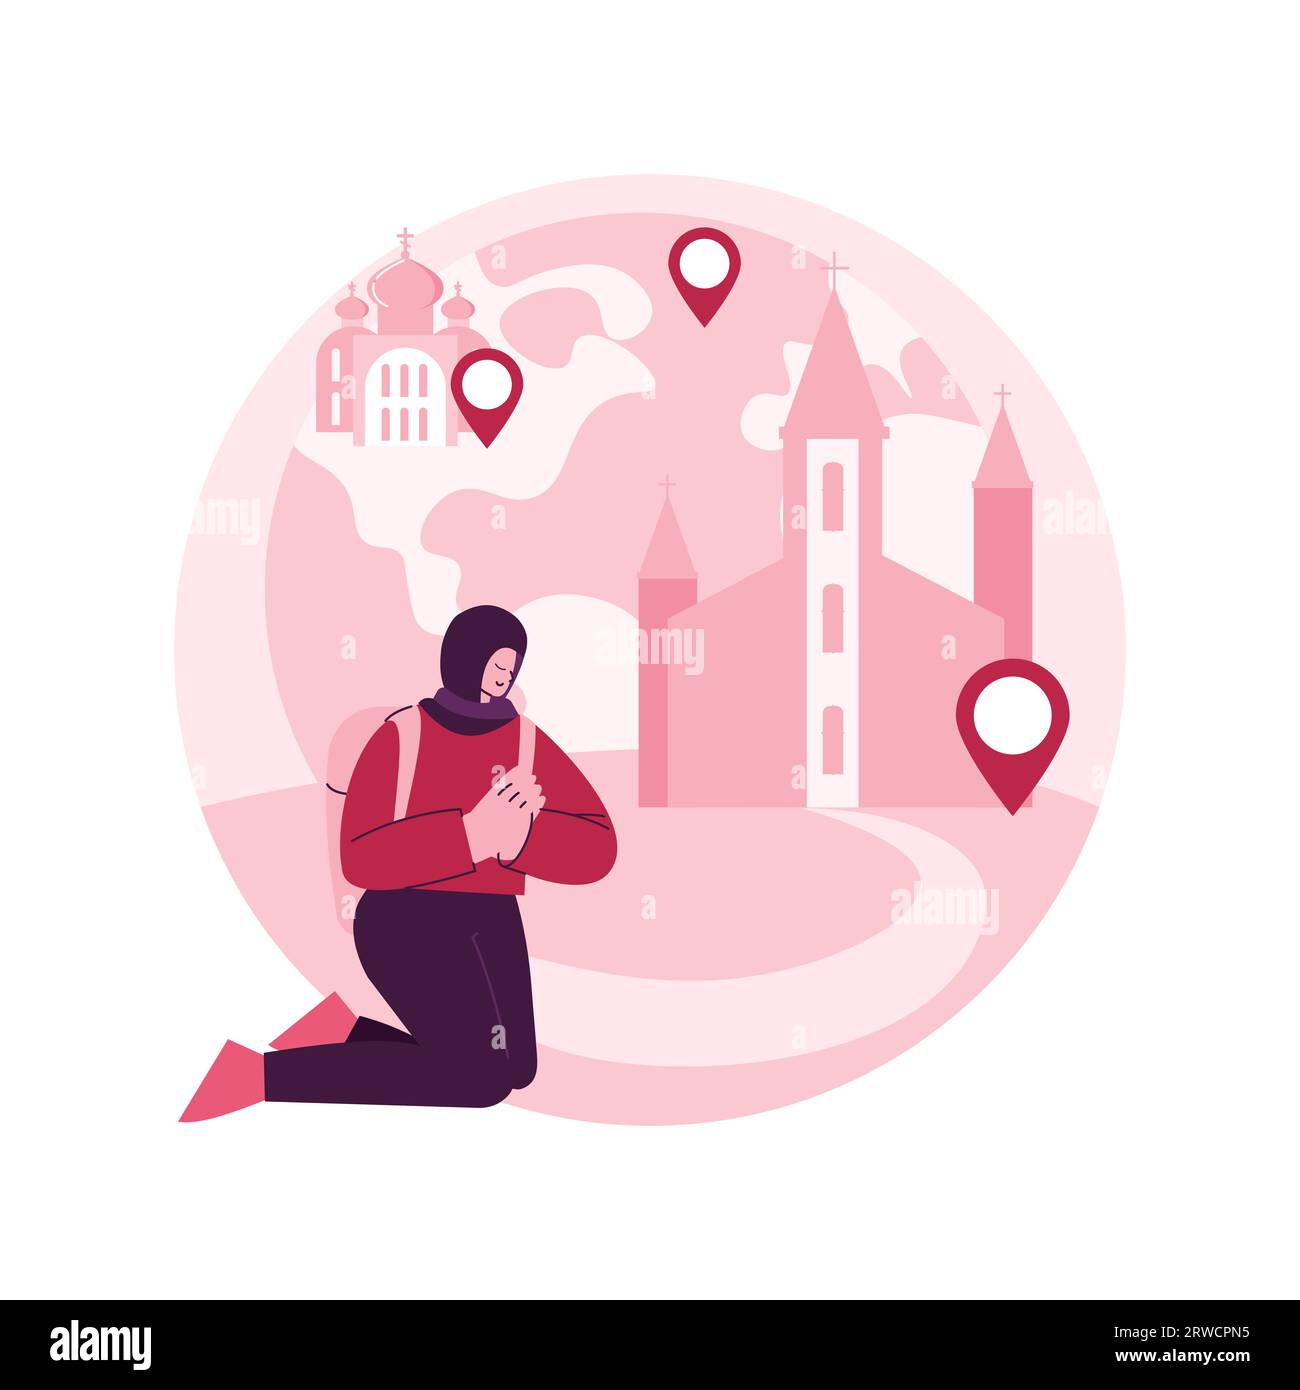 Christian pilgrimages abstract concept vector illustration. Go on pilgrimage, visit saint places, seeking god, christian nuns, monks in monastery, religious procession, prayer abstract metaphor. Stock Vector